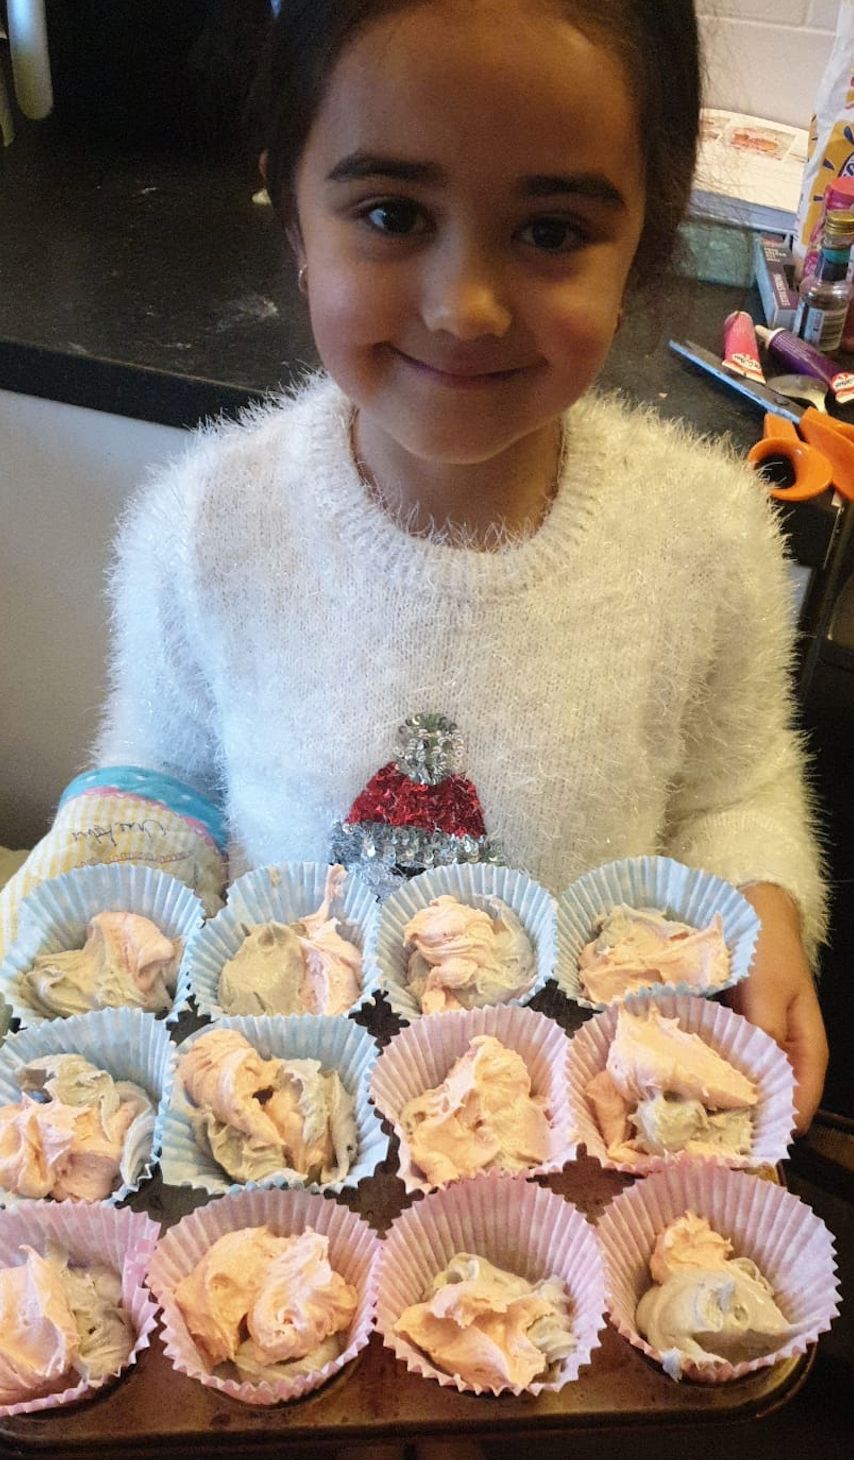 Terri-Anne's daughter Amayah with some of the baking she has done in lockdown